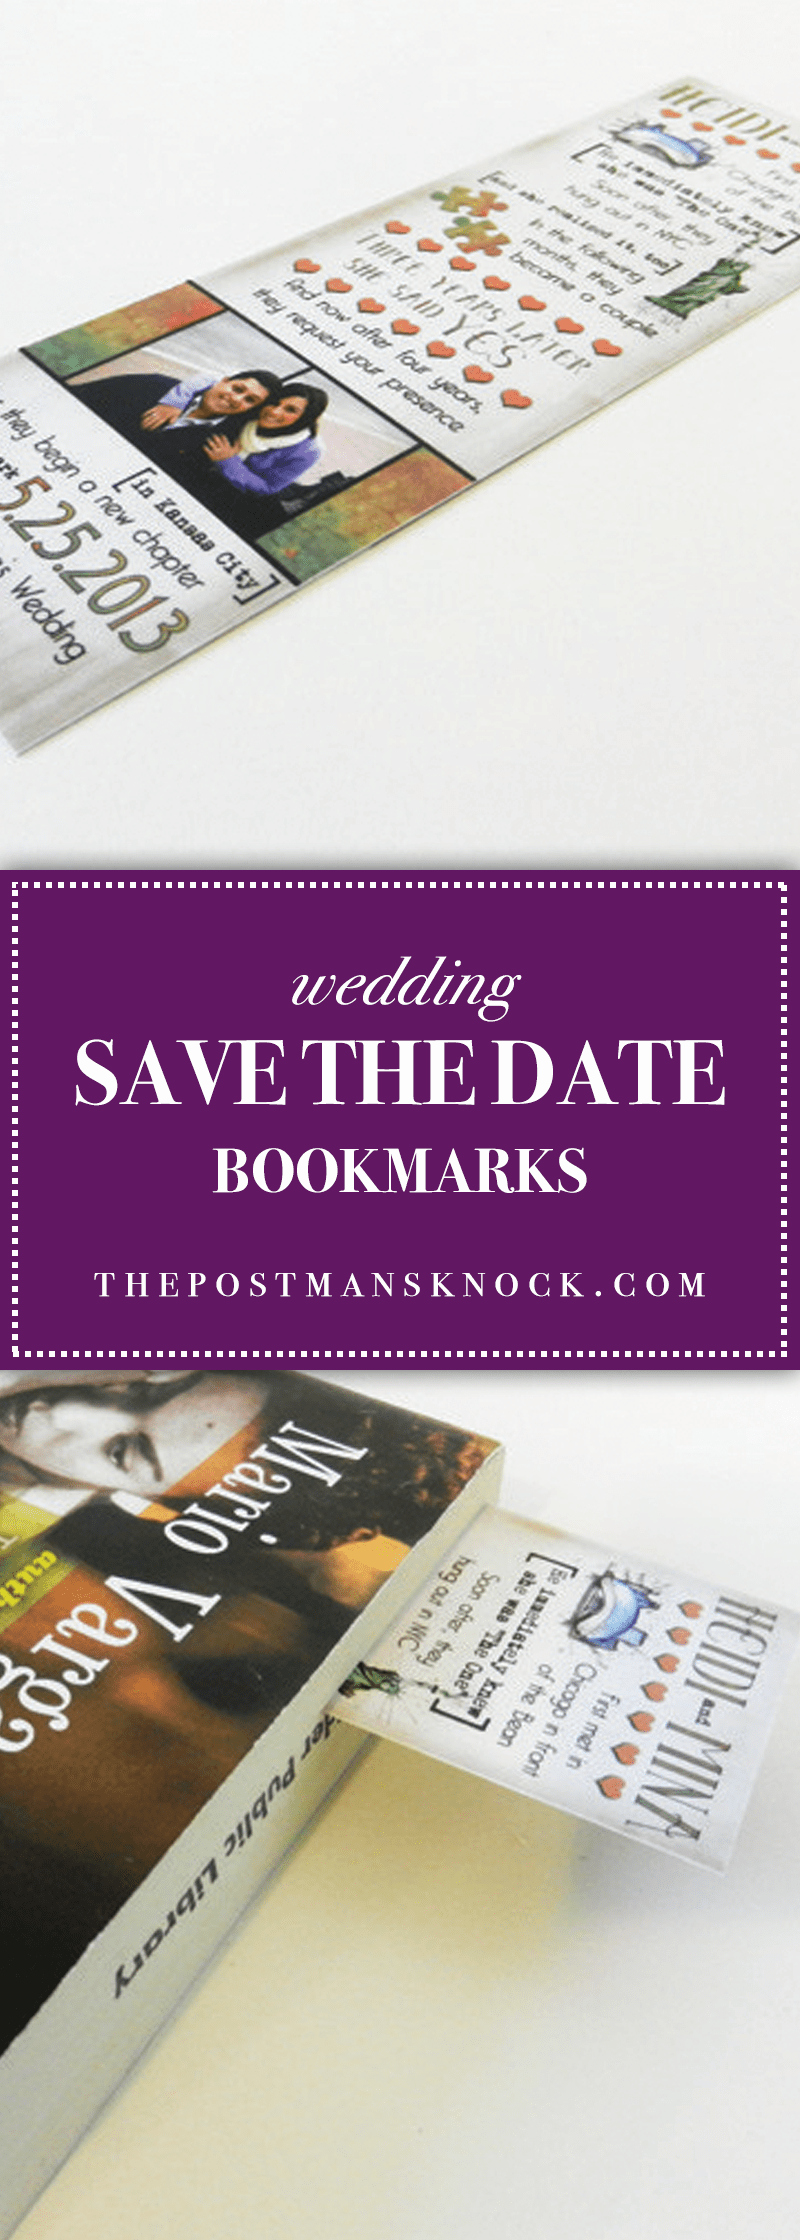 Save the Date Bookmarks Awesome Wedding Save the Date Bookmarks